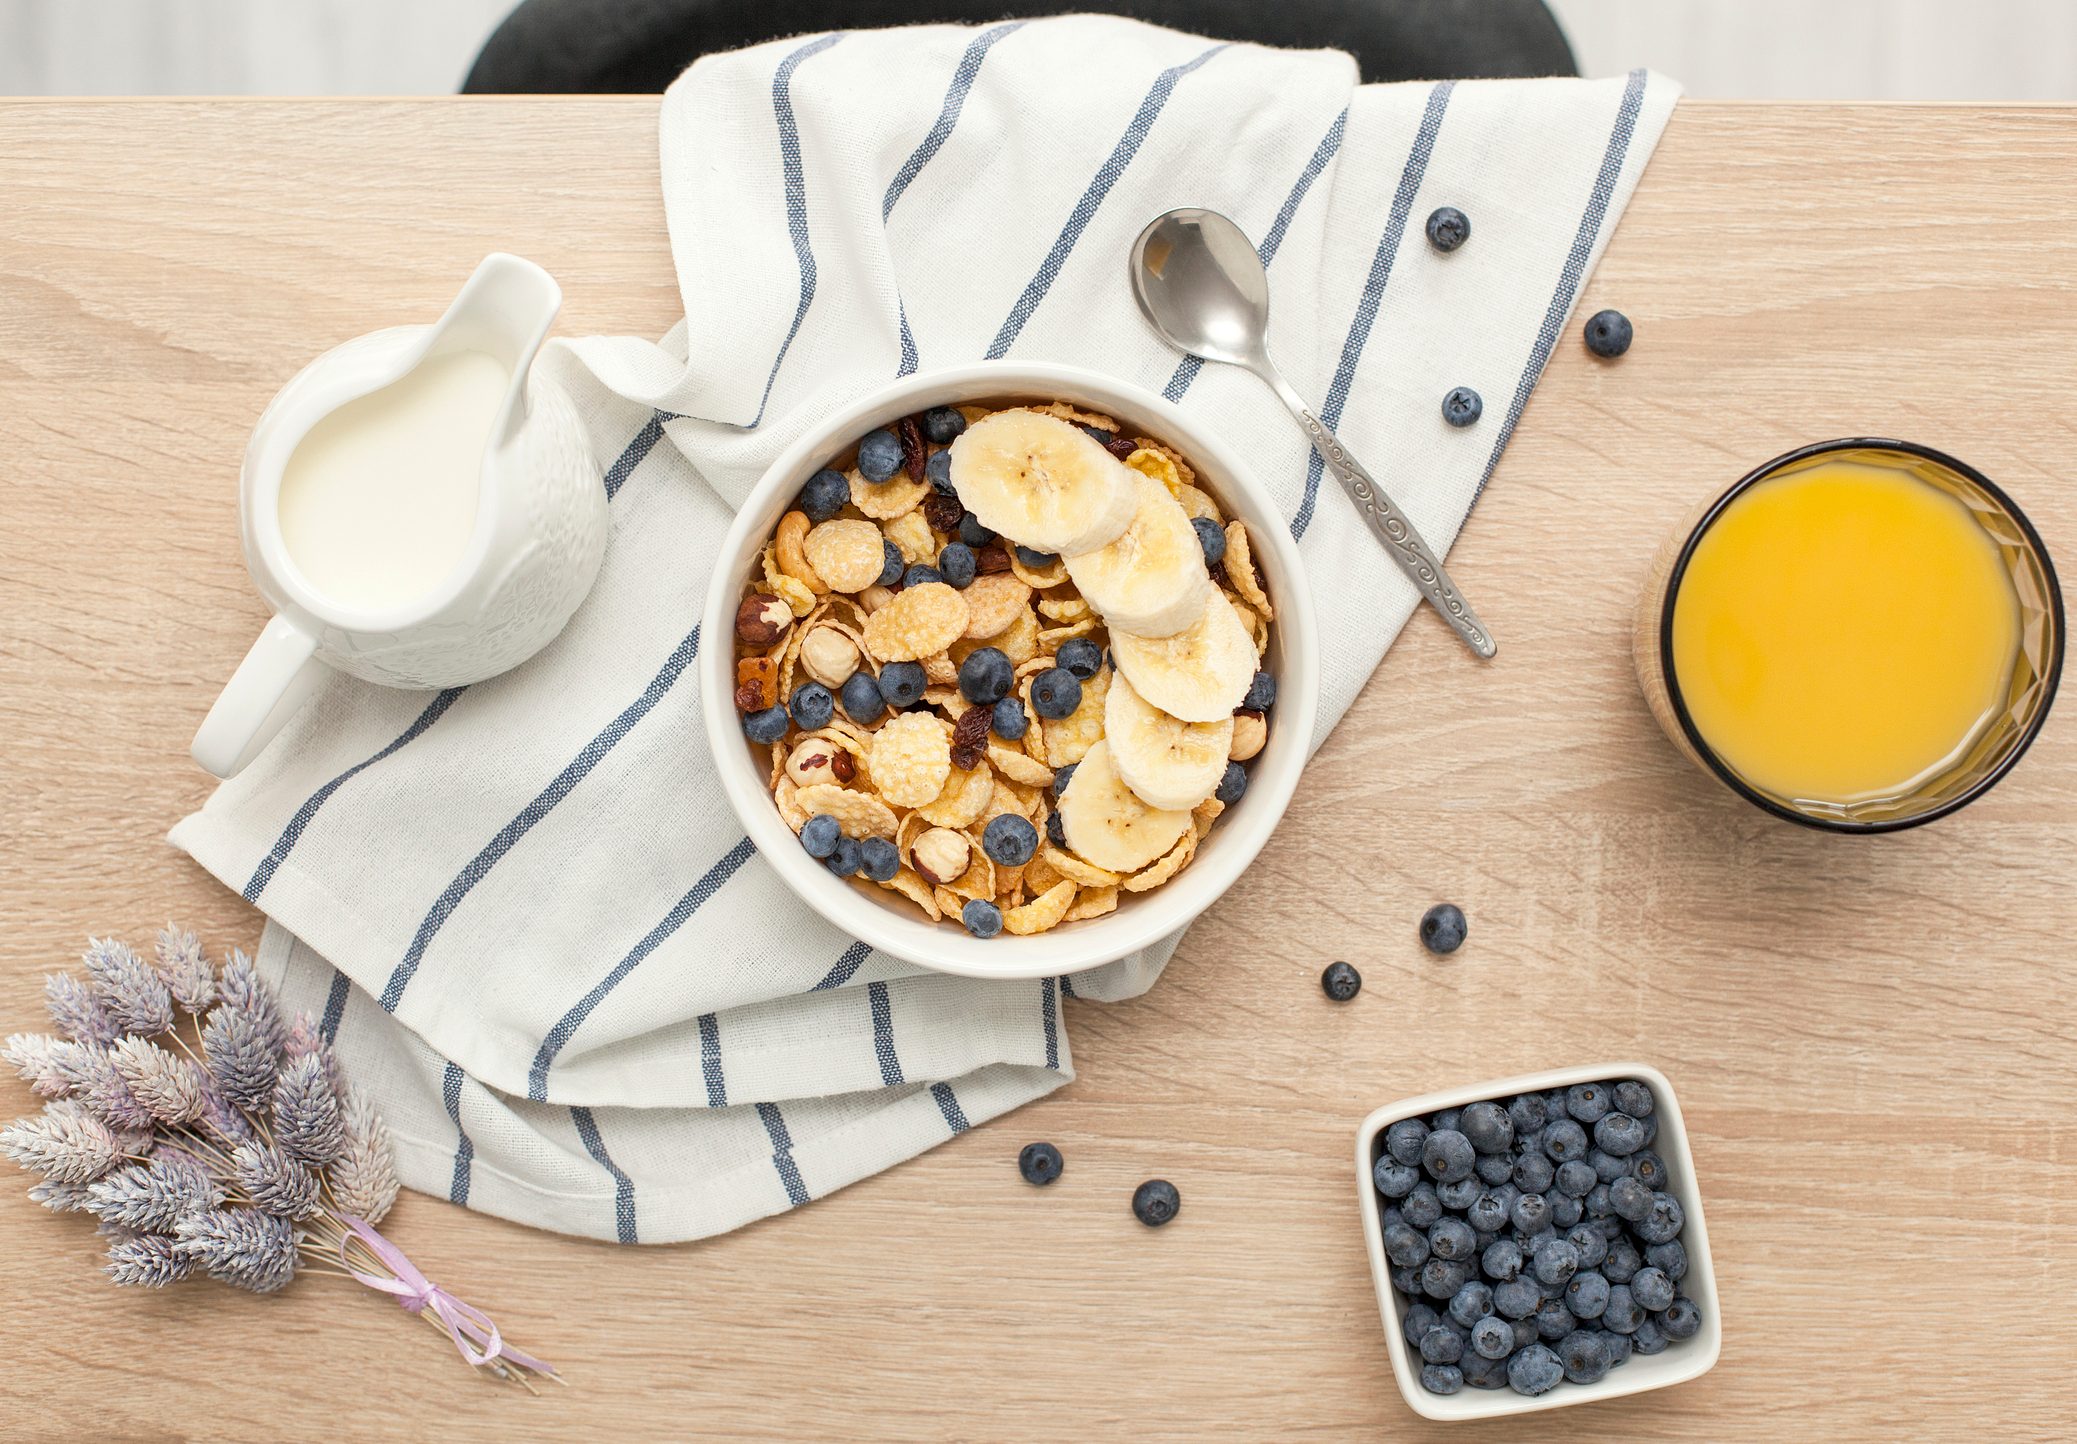 16 Things Doctors Eat for Breakfast Every Day